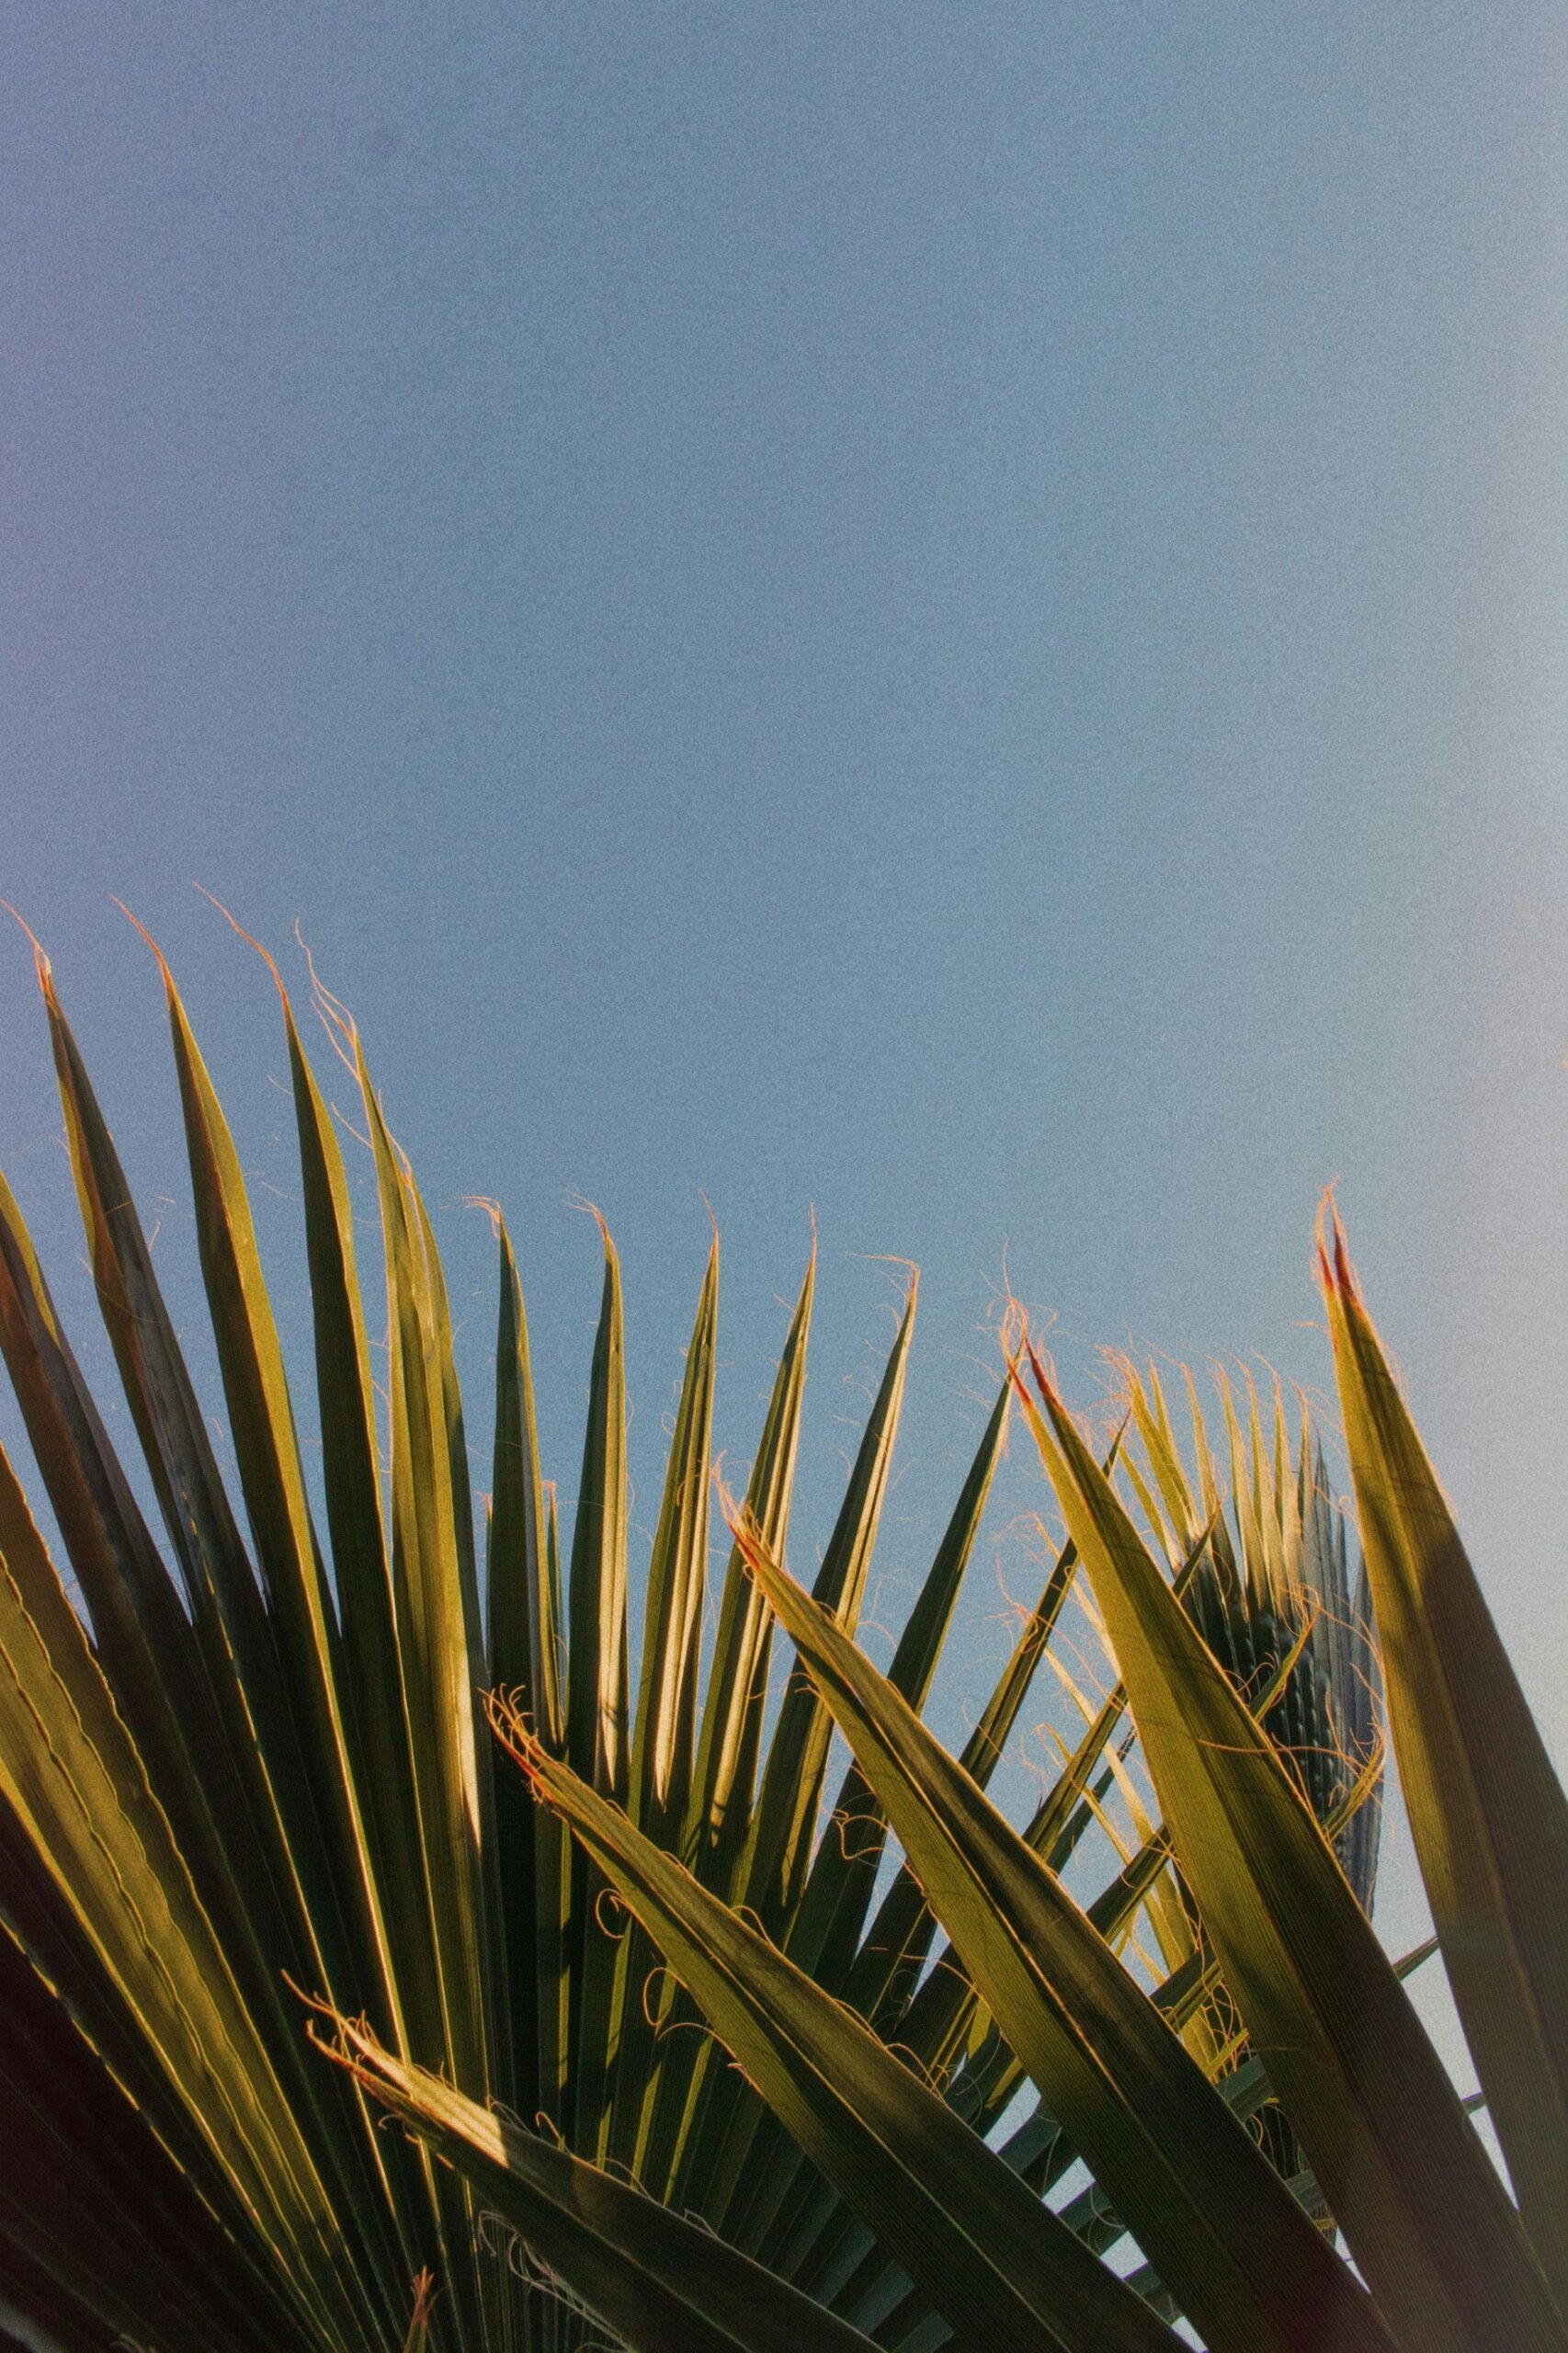 Palm fronds in the lower half of an image of a blue sky.